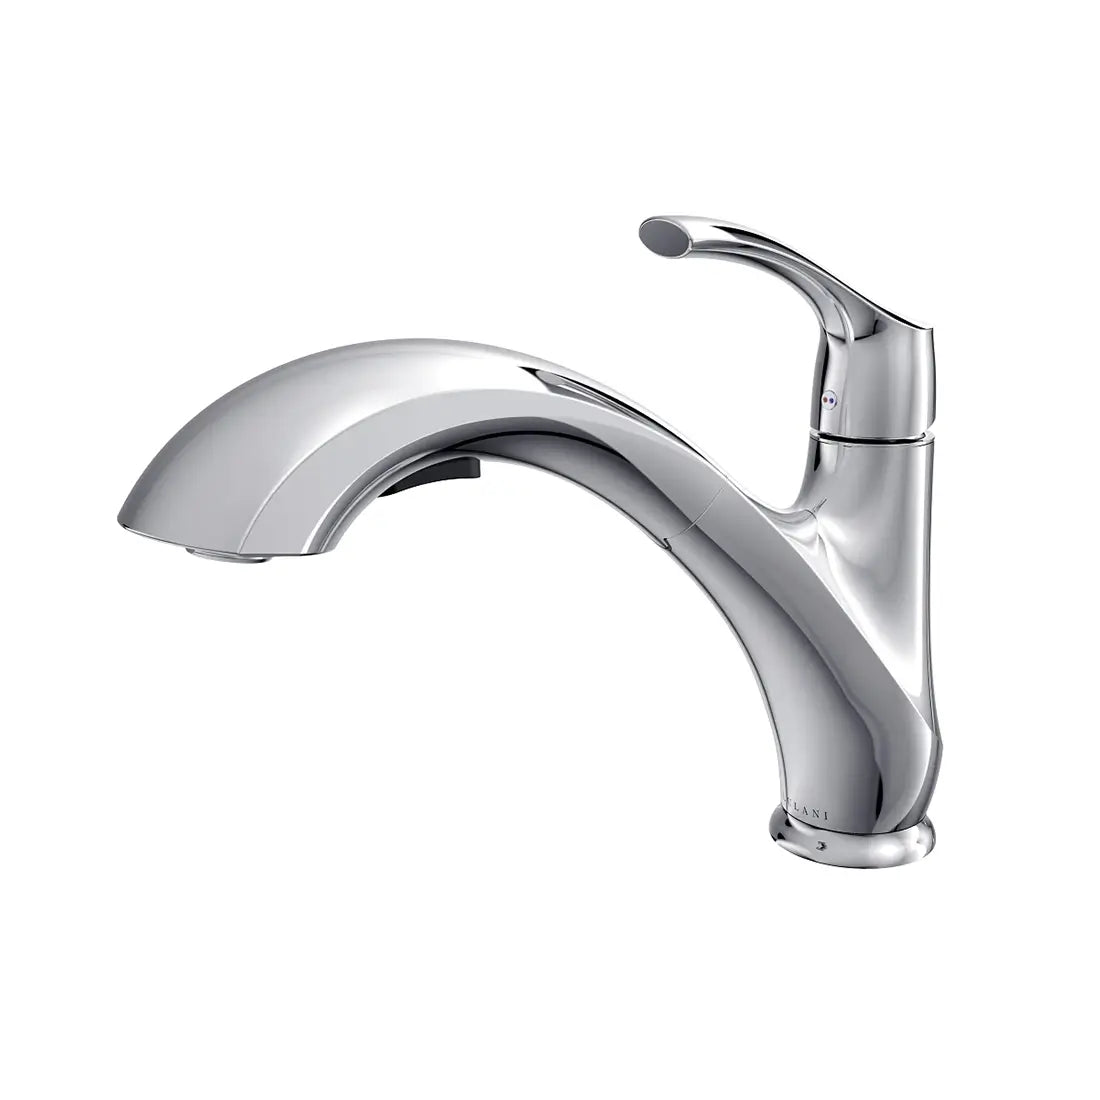 Maldives - Low Profile Pull-Out Kitchen Faucet